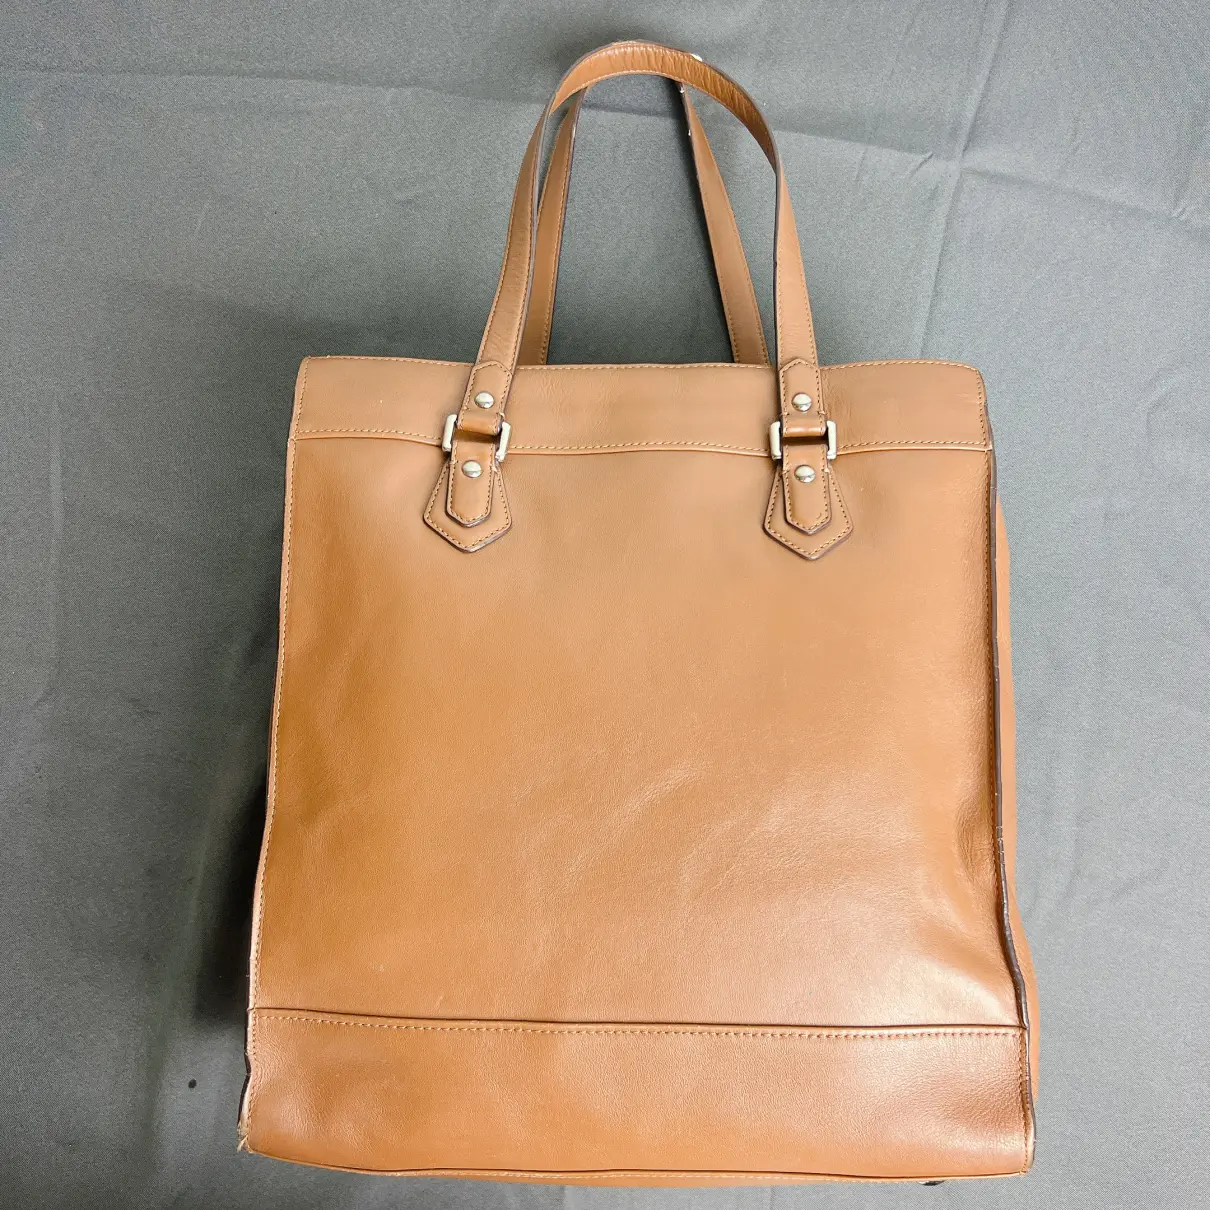 Buy Coach CITY ZIP TOTE leather tote online